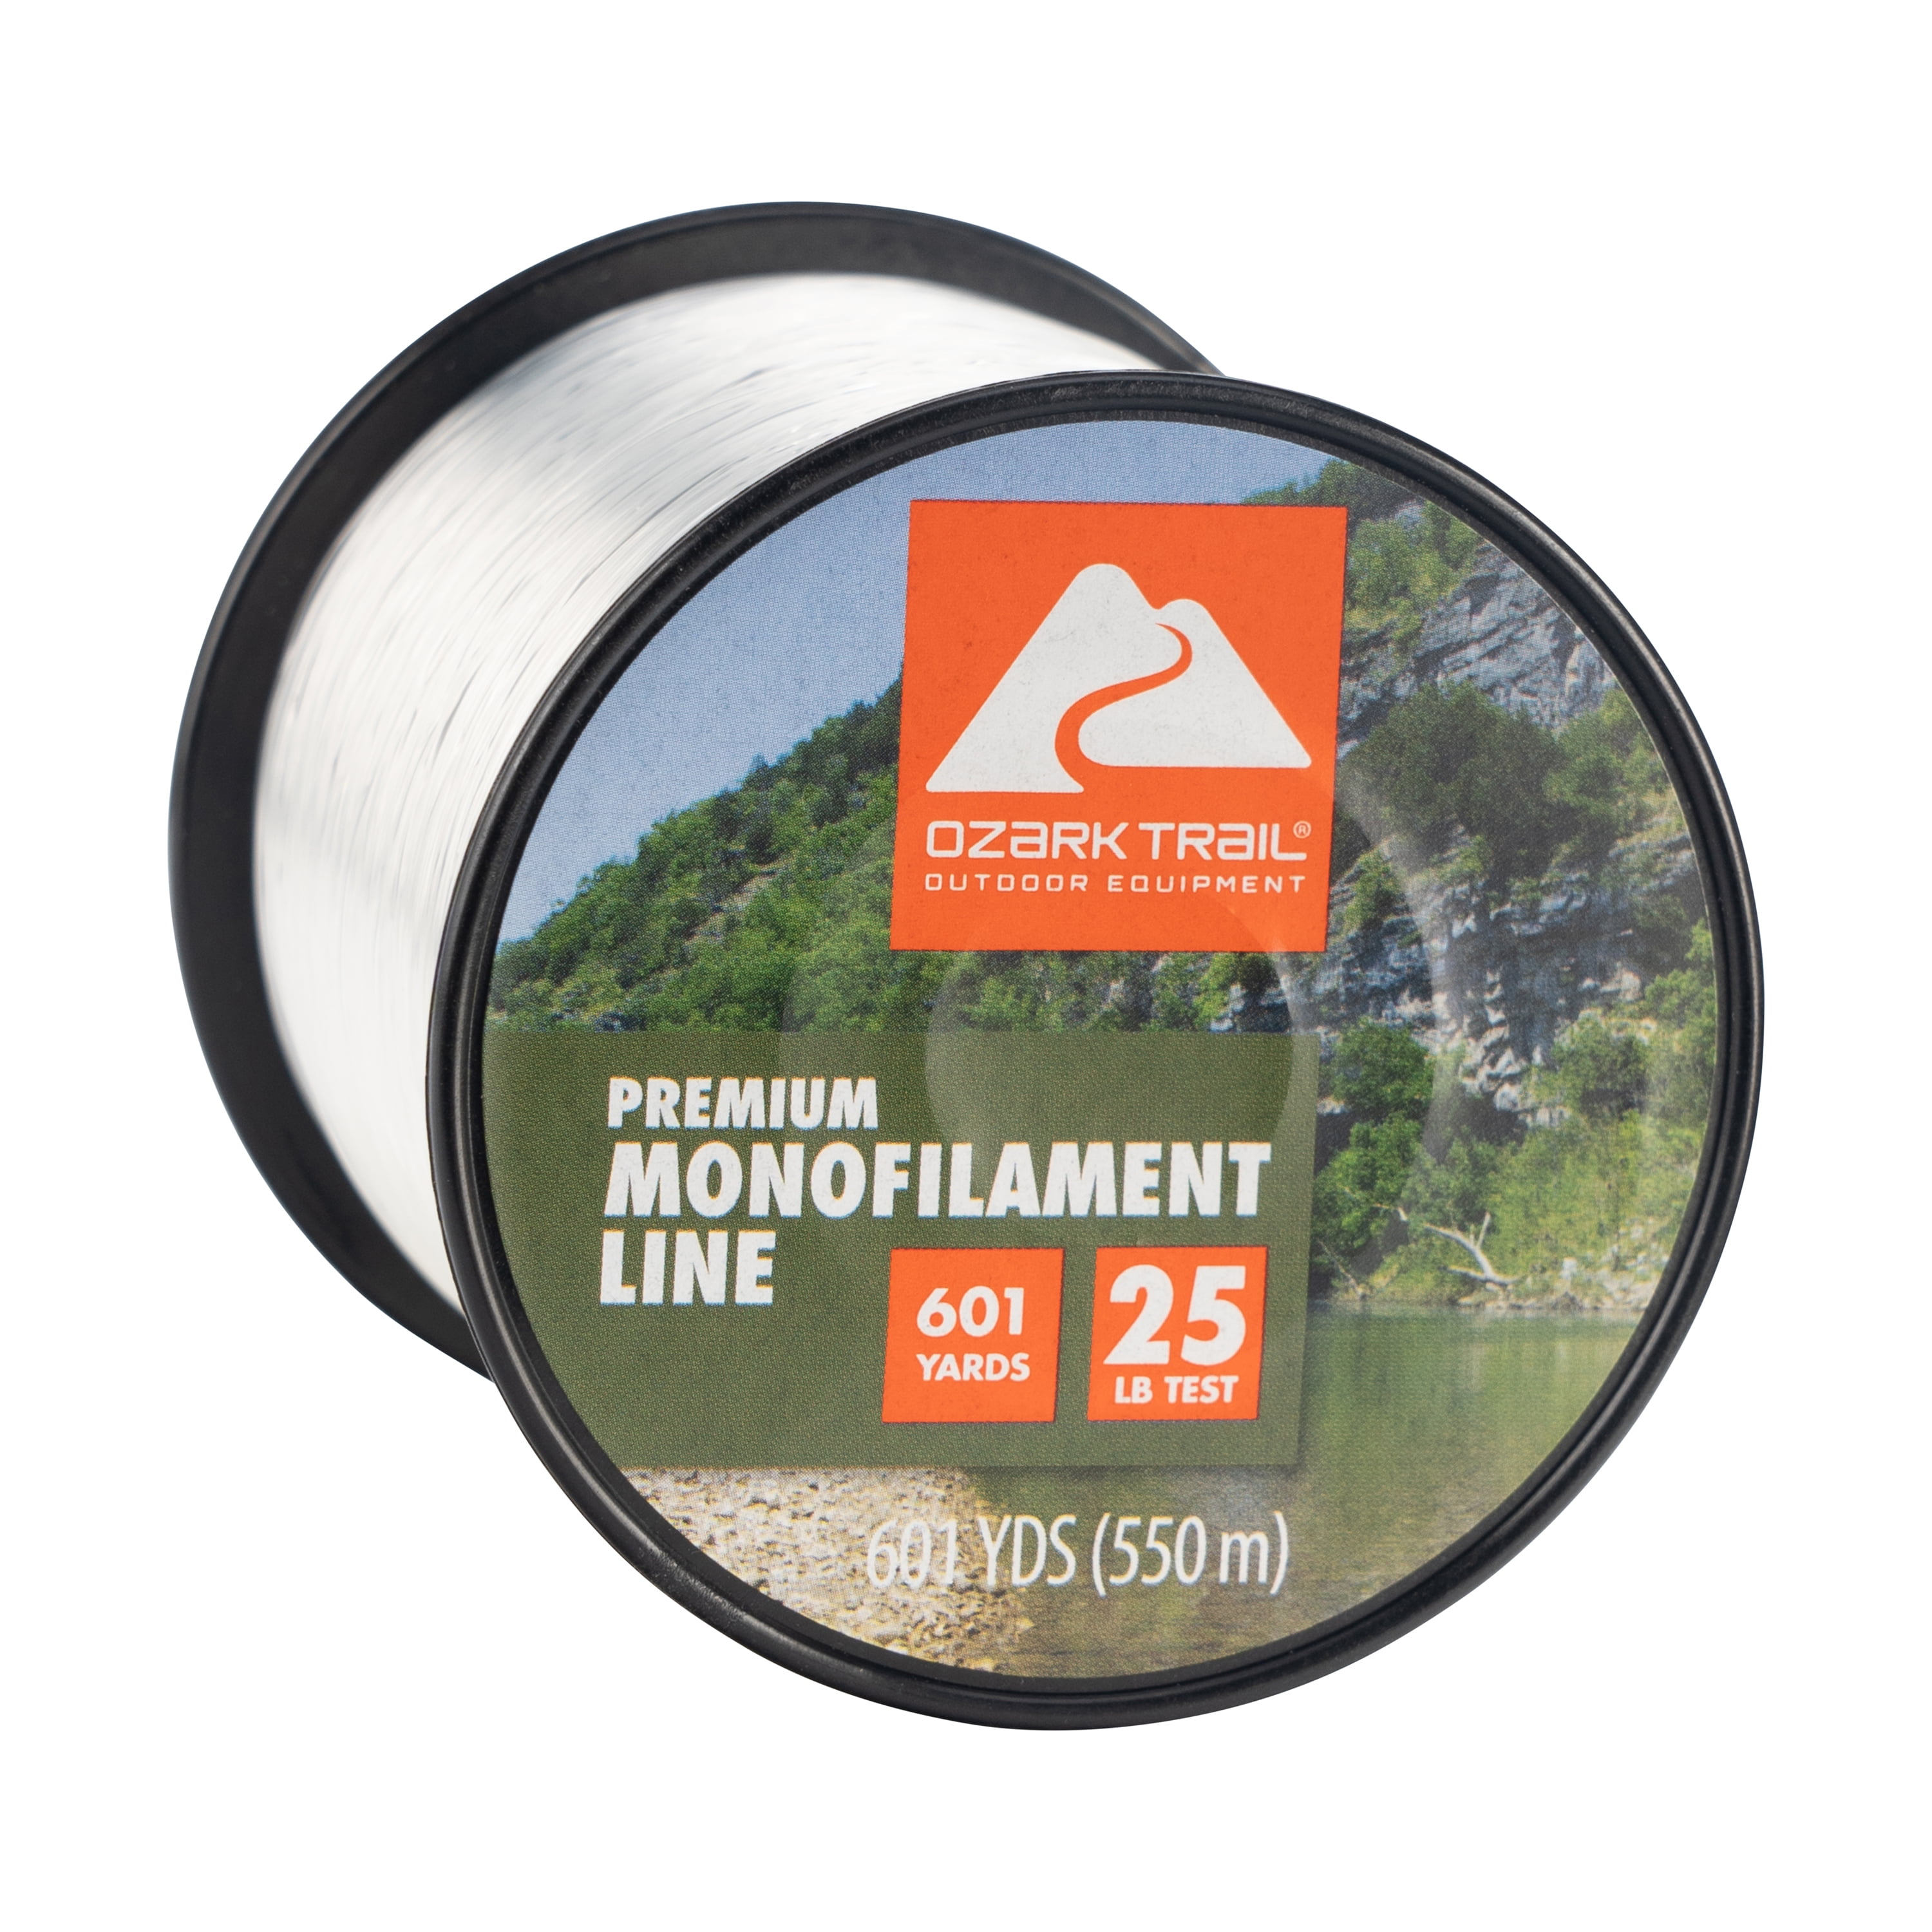 Ande Premium Monofilament Line with 80-Pound Test, Hi-Vis Green, 0.25-Pound  Spool (150-Yard) : Fishing Line : Sports & Outdoors 